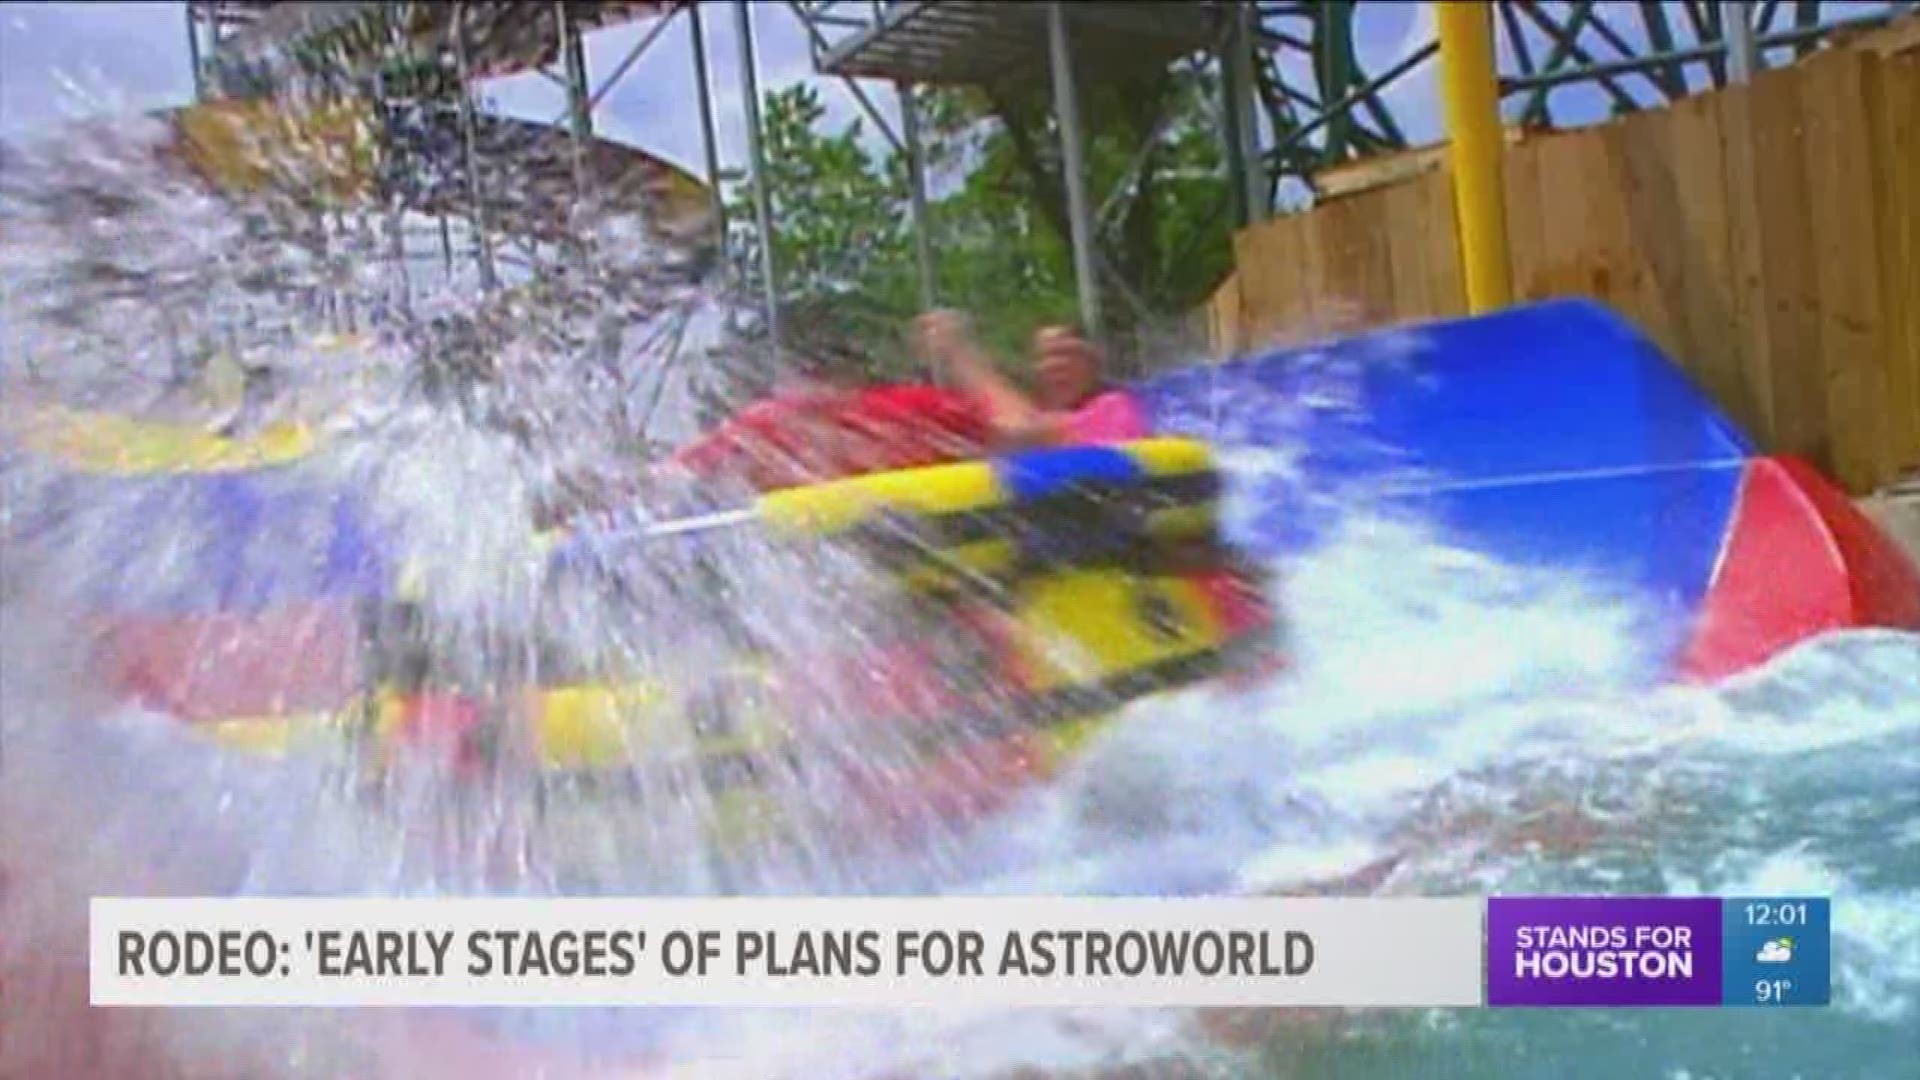 The Houston Livestock Show and Rodeo owns nearly 102 acres of the land where Six Flags AstroWorld shuttered in 2005.